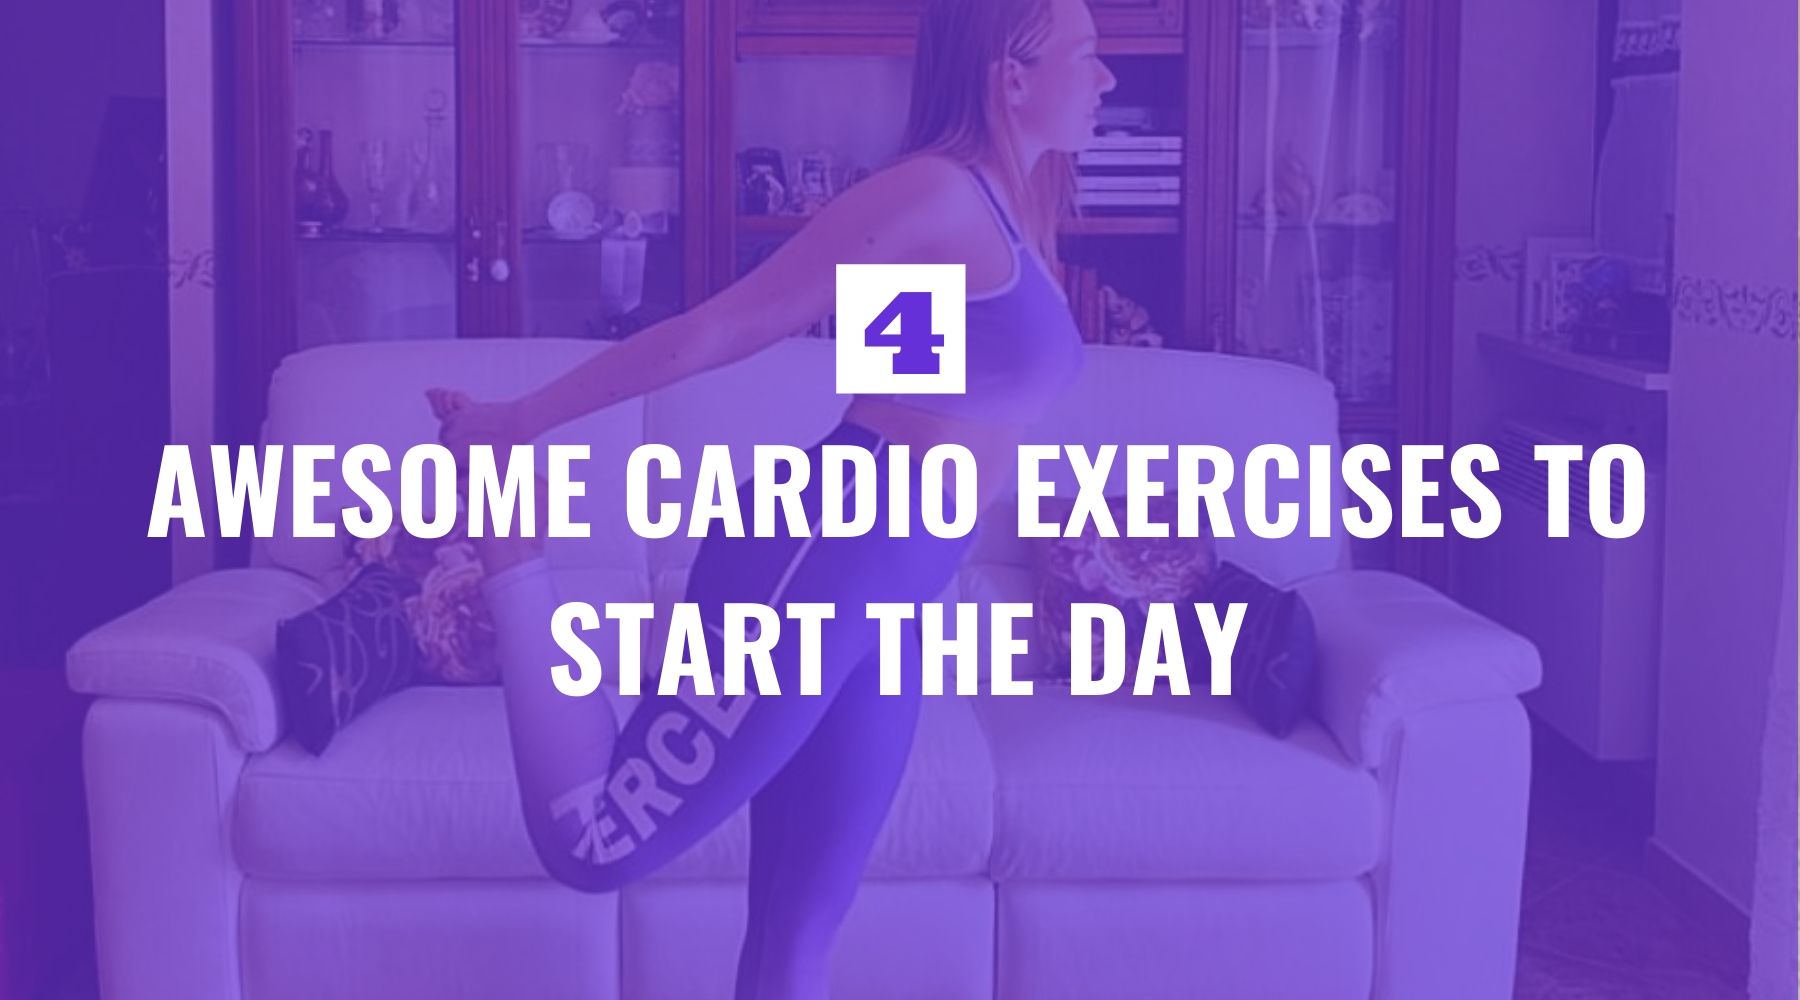 Four Awesome Cardio Exercises to Start the Day